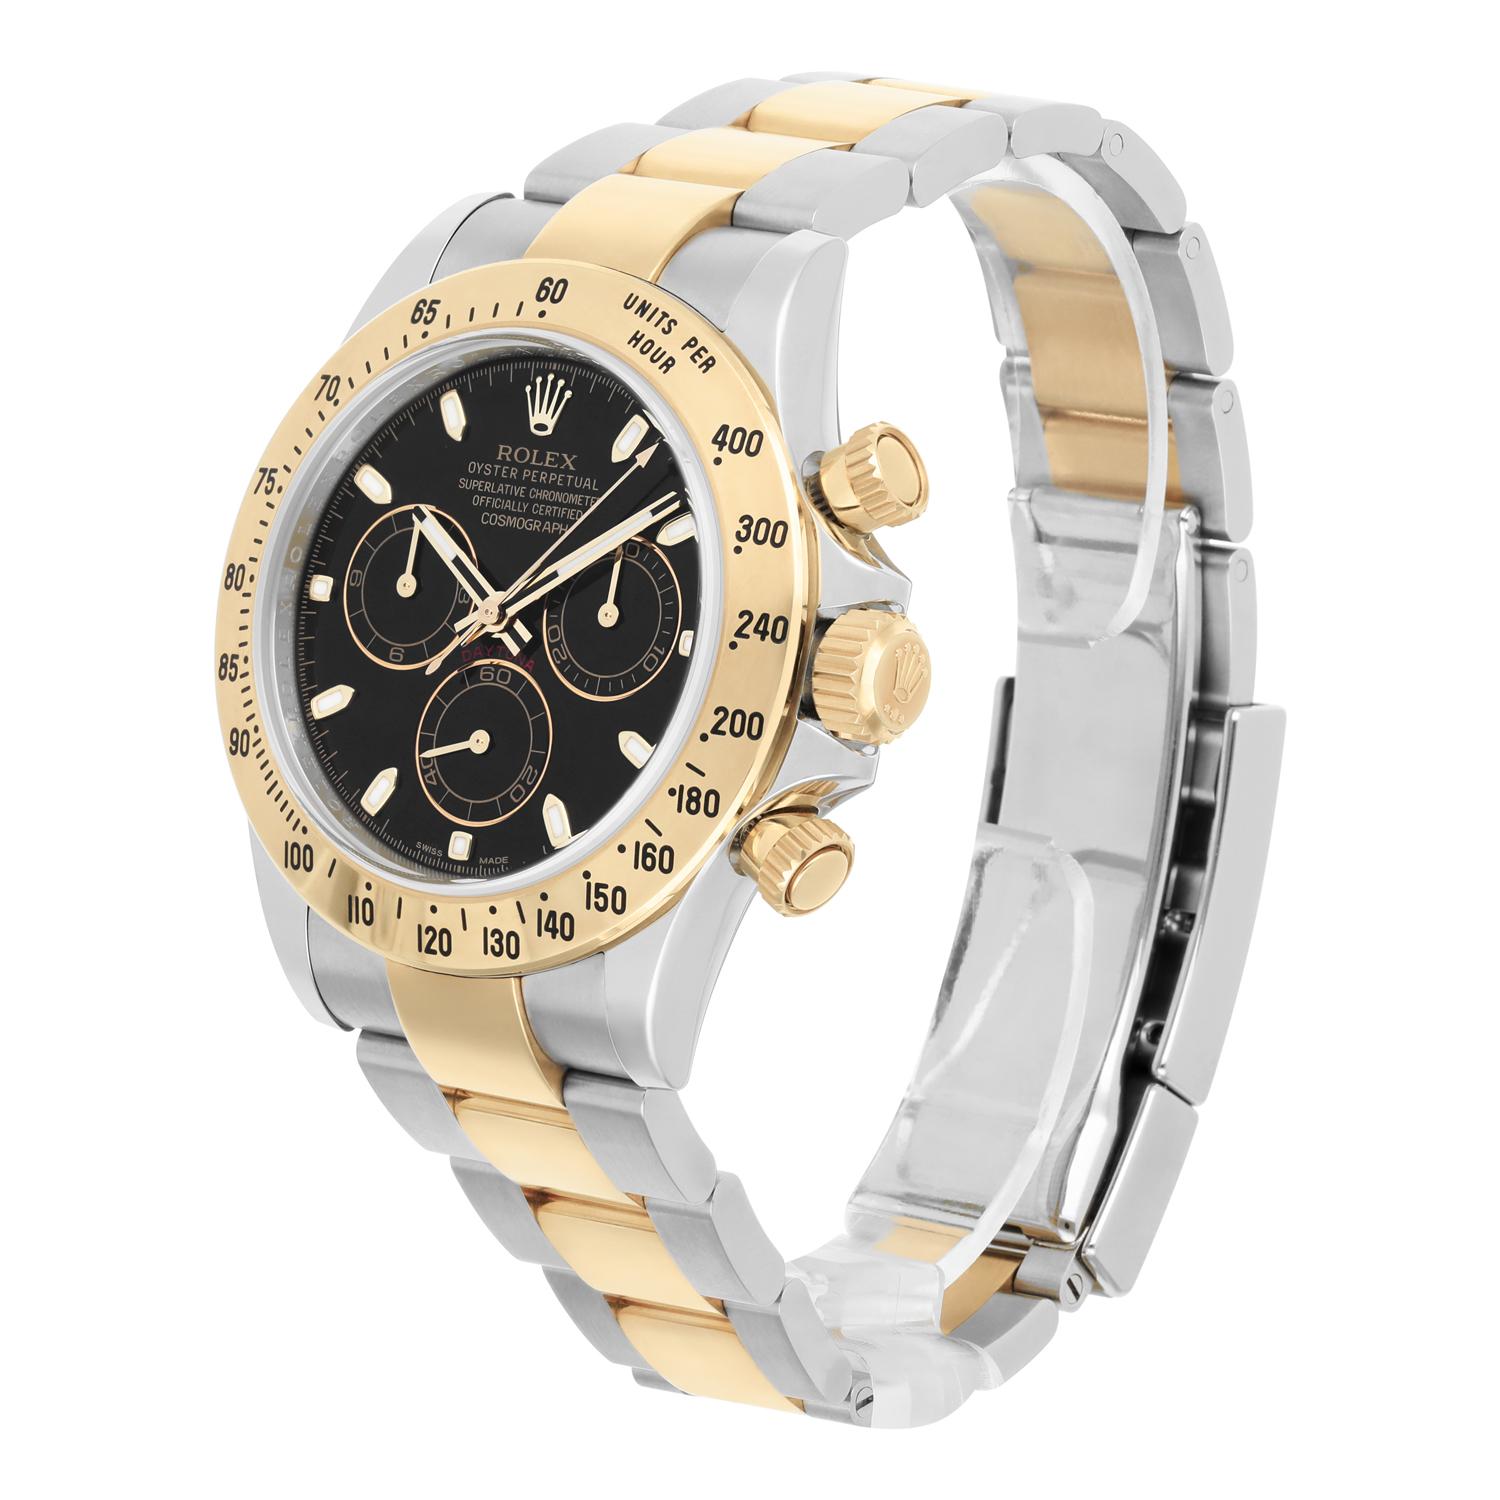 Rolex Daytona Stainless Steel Yellow Gold Black Dial Mens Watch 116523 In Excellent Condition For Sale In New York, NY